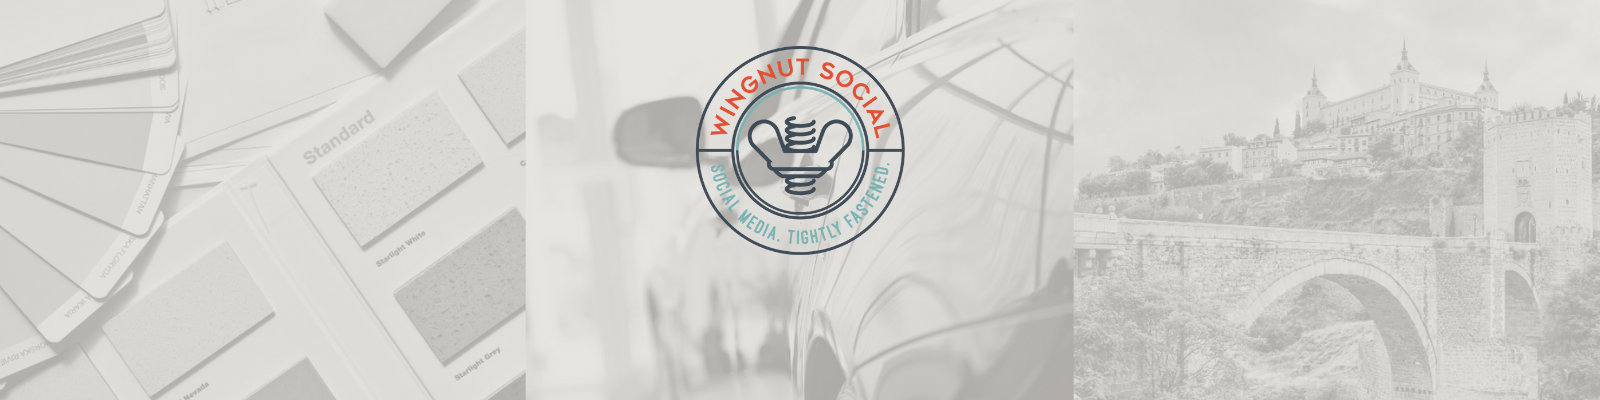 Wingnut Social: The Interior Design Marketing and Business Podcast